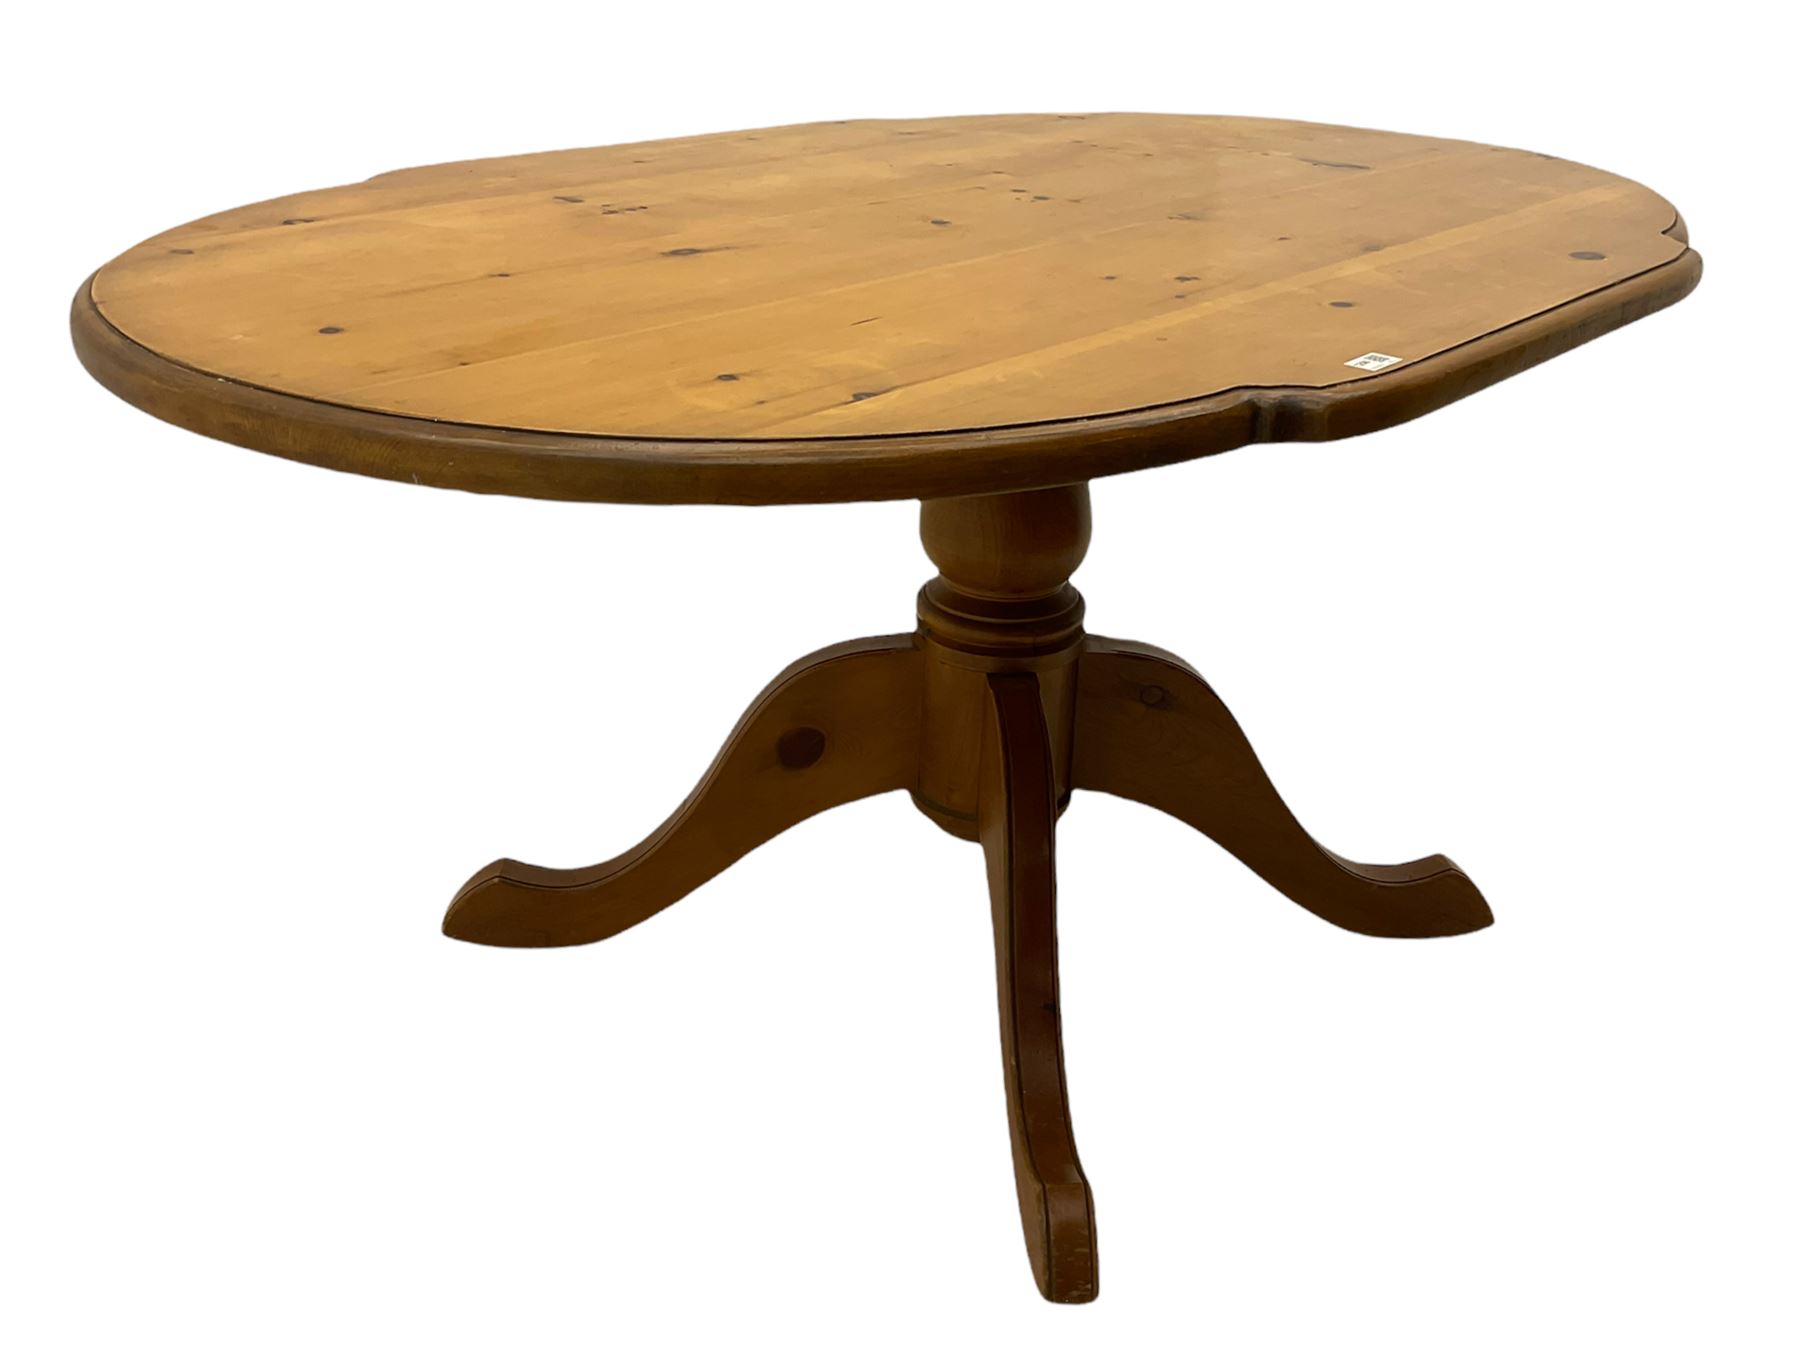 Solid pine oval pedestal dining table - Image 6 of 15